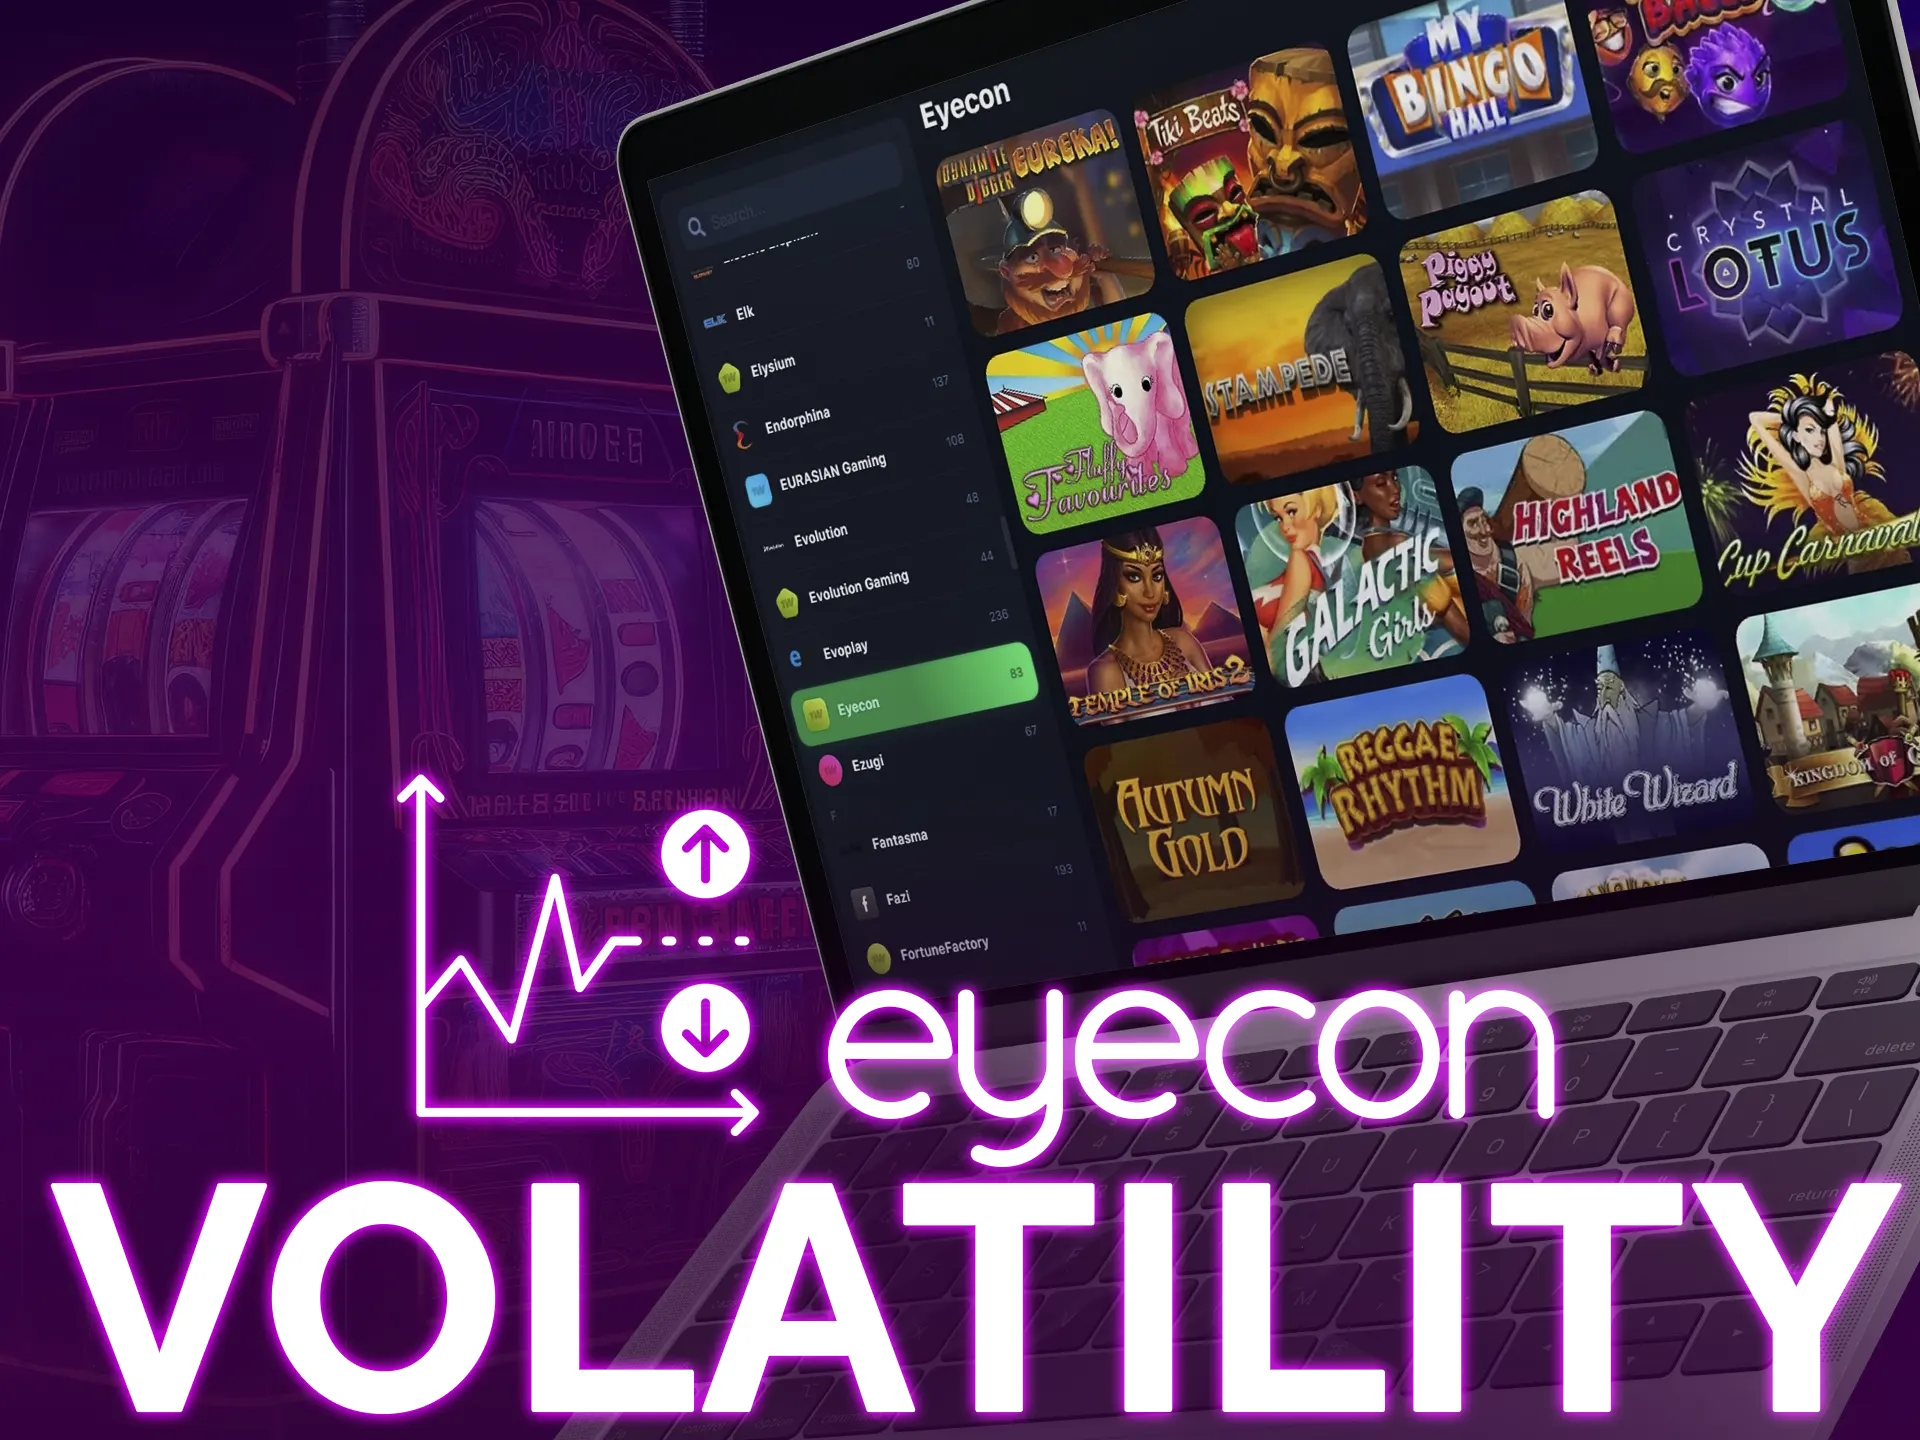 Volatility affects winnings. Eyecon games boast high and above-average performance.